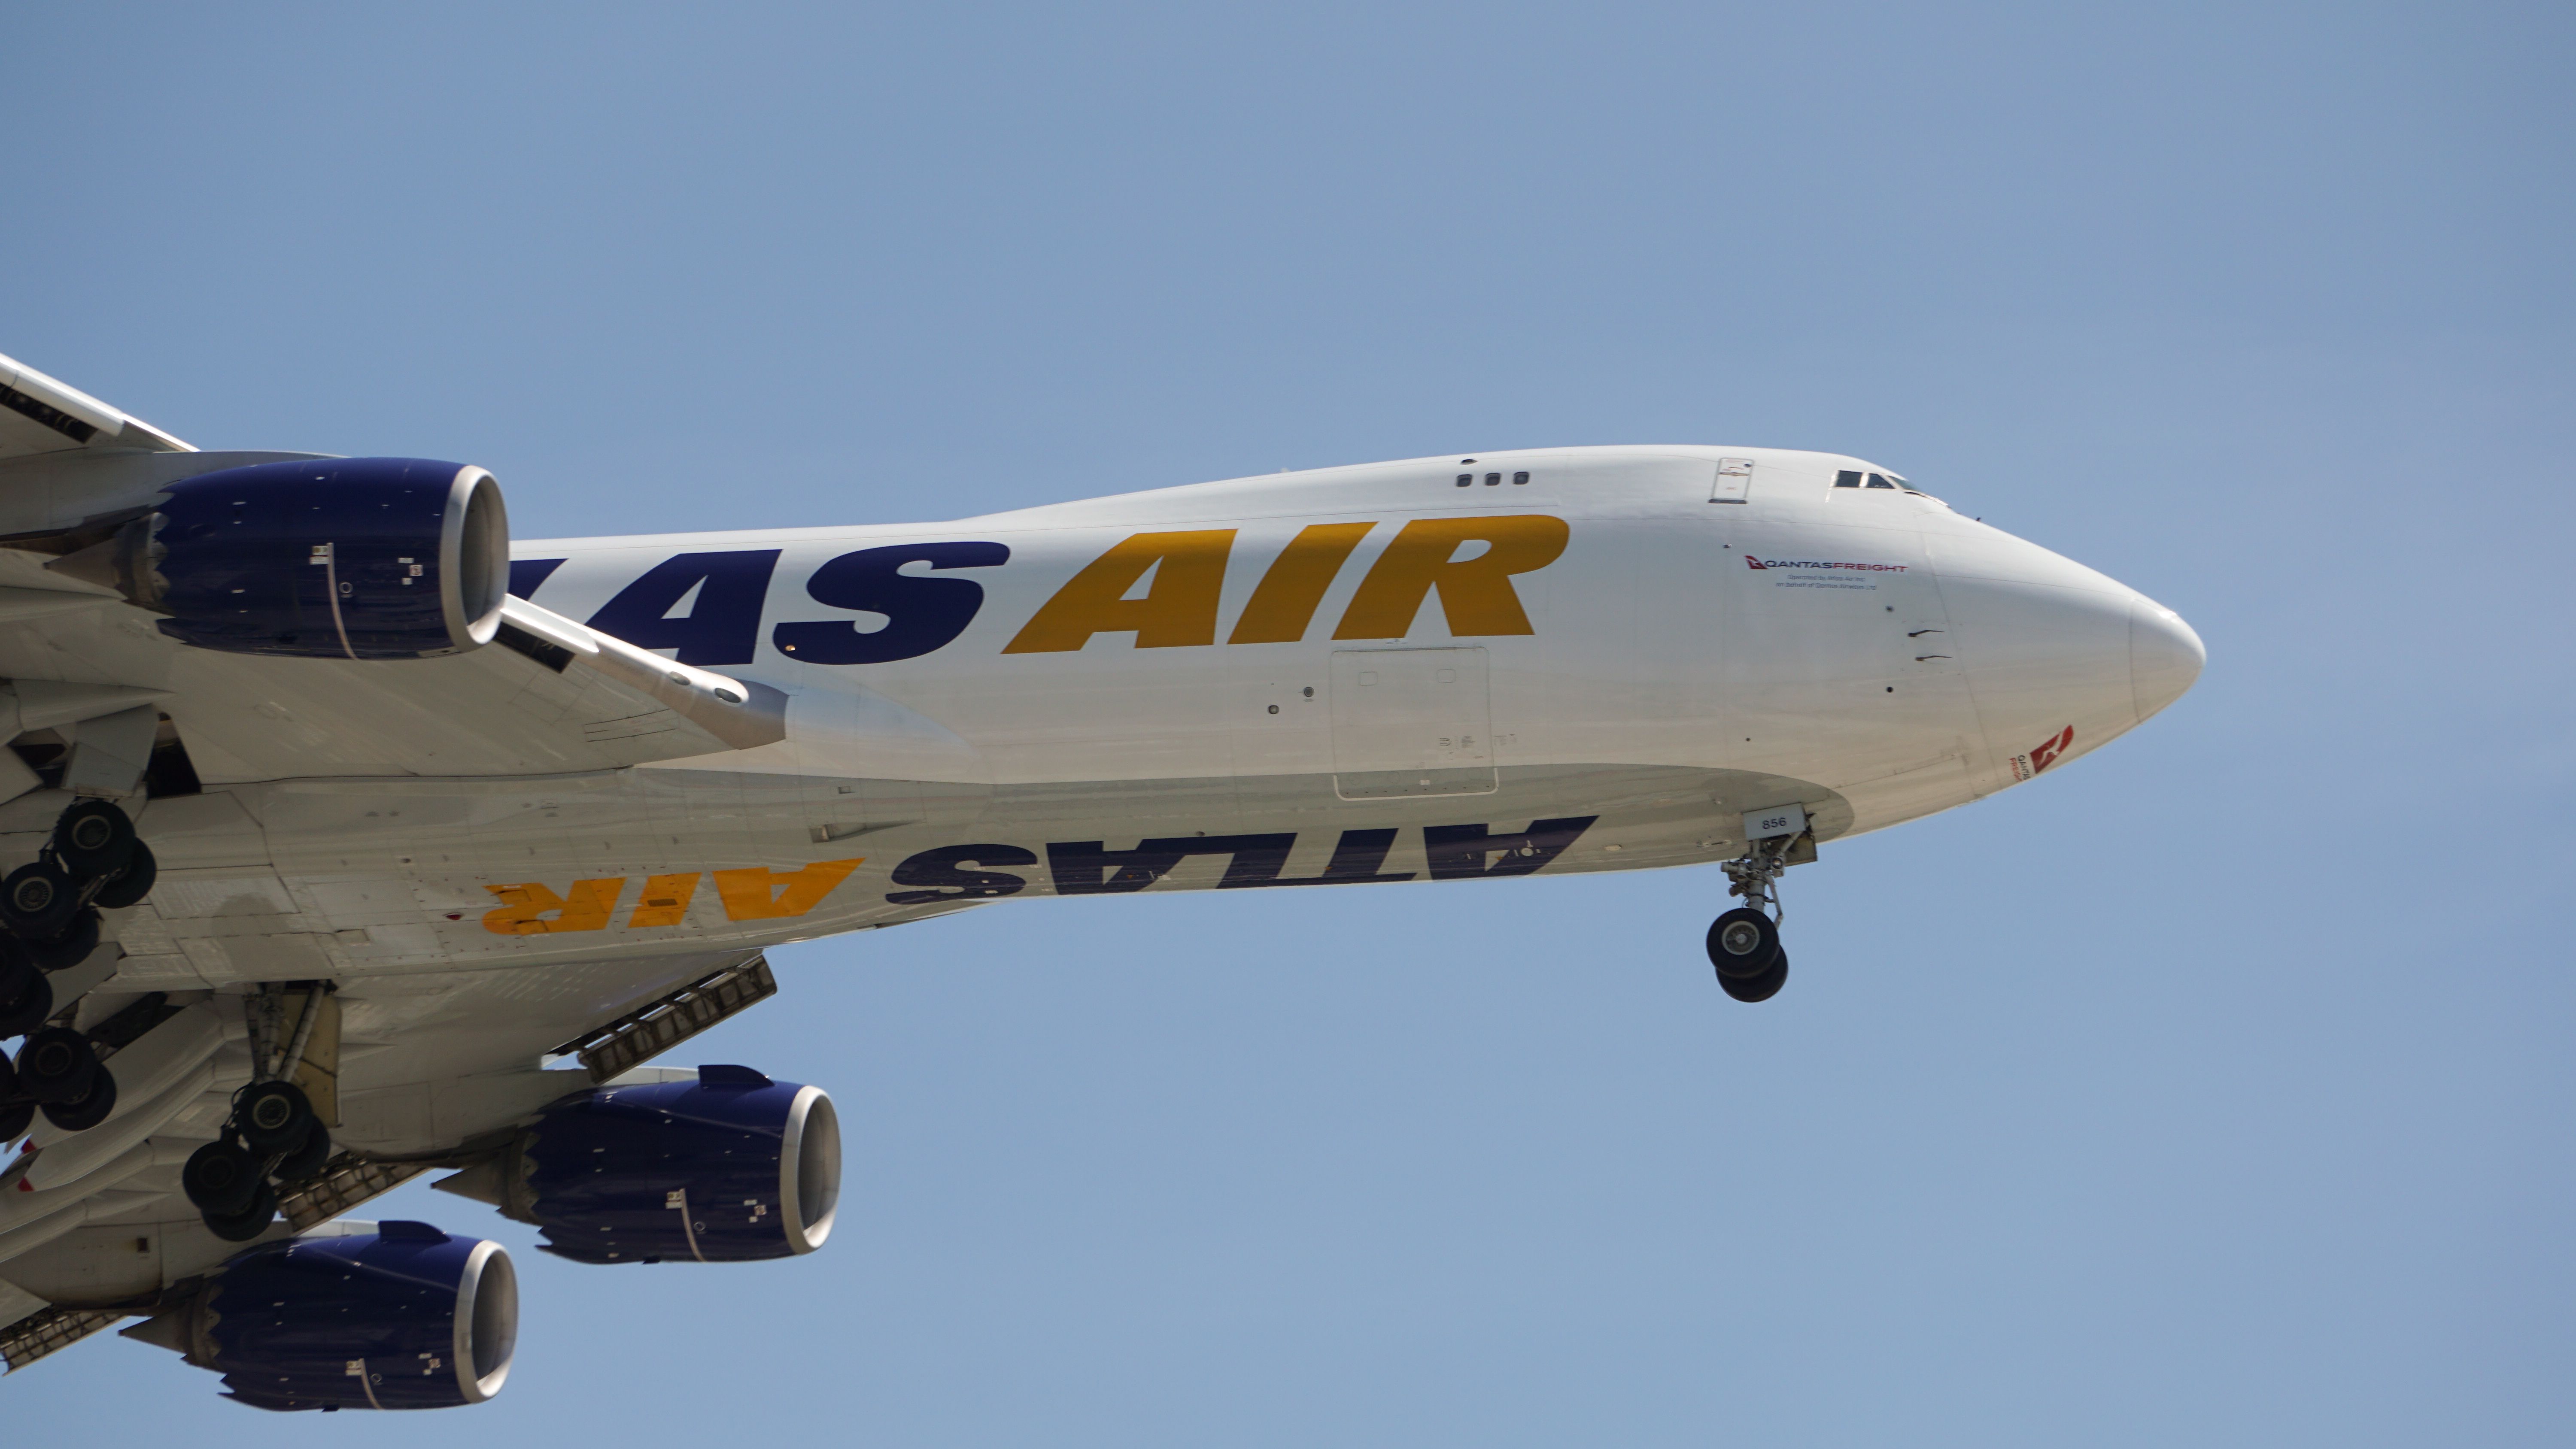 Atlas Air Boeing 747-8F landing at Chicago O'Hare International Airport ORD